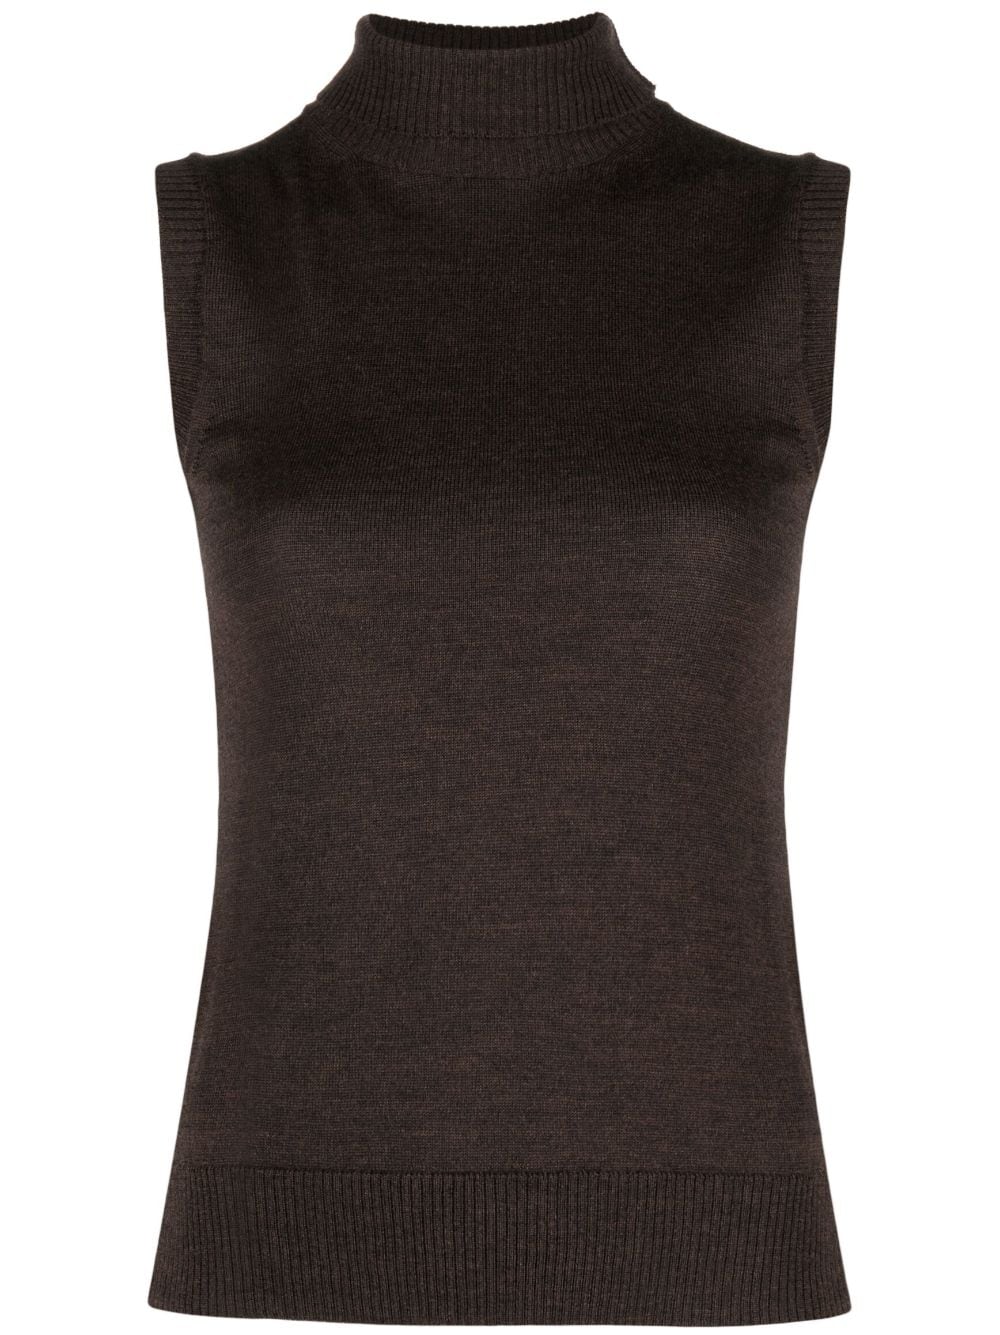 Image 1 of Sportmax roll-neck sleeveless knit top